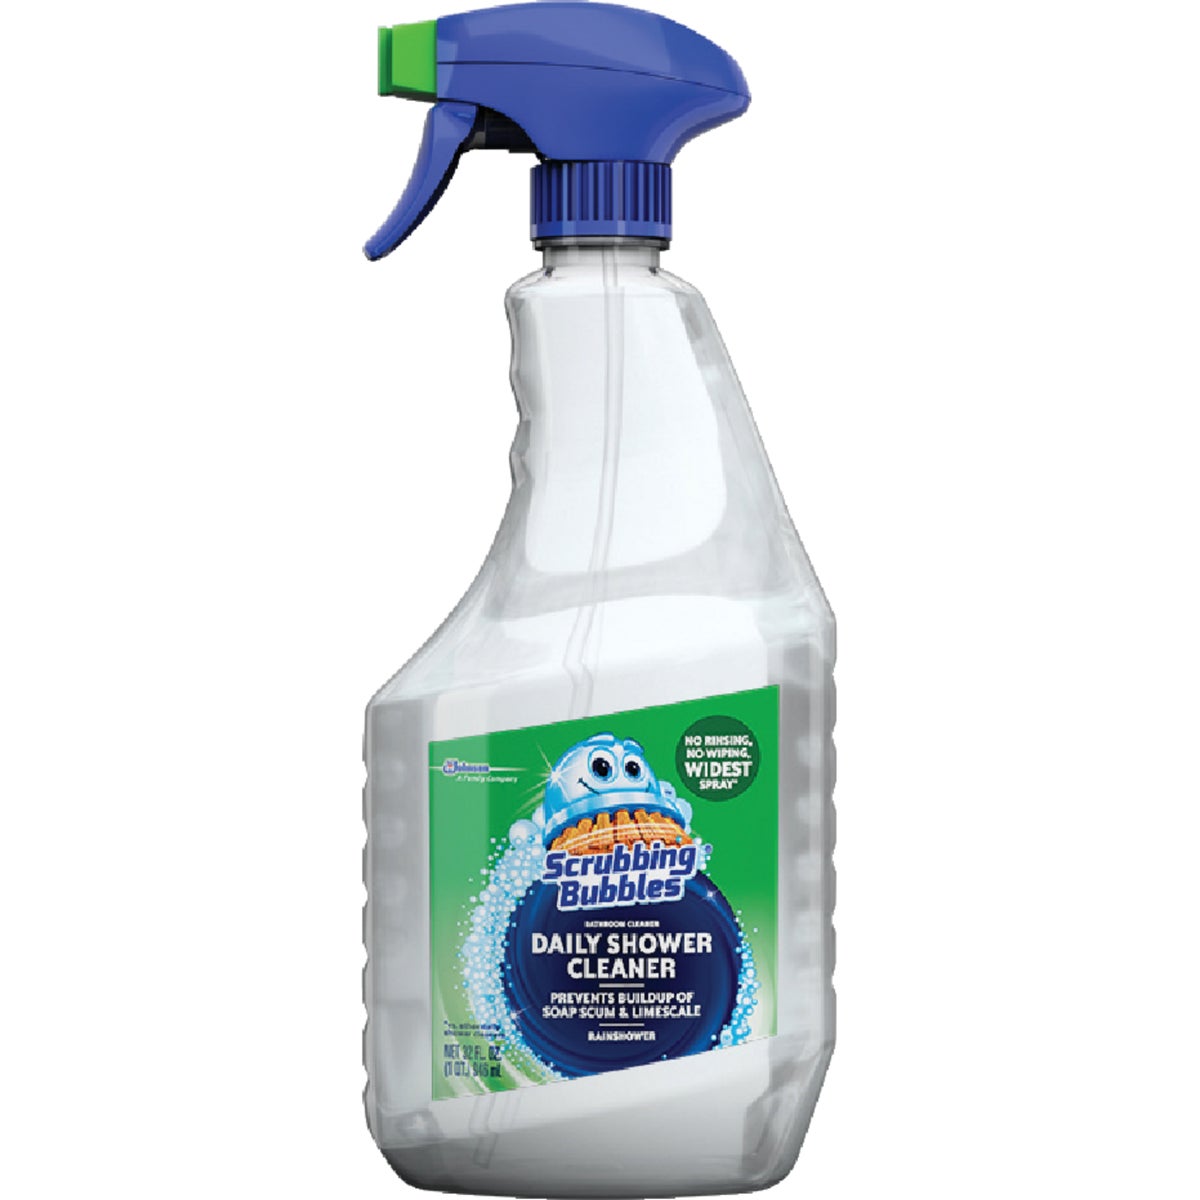 Item 602190, Scrubbing Bubbles Daily Shower Cleaner has a wide spray with a dual-action 